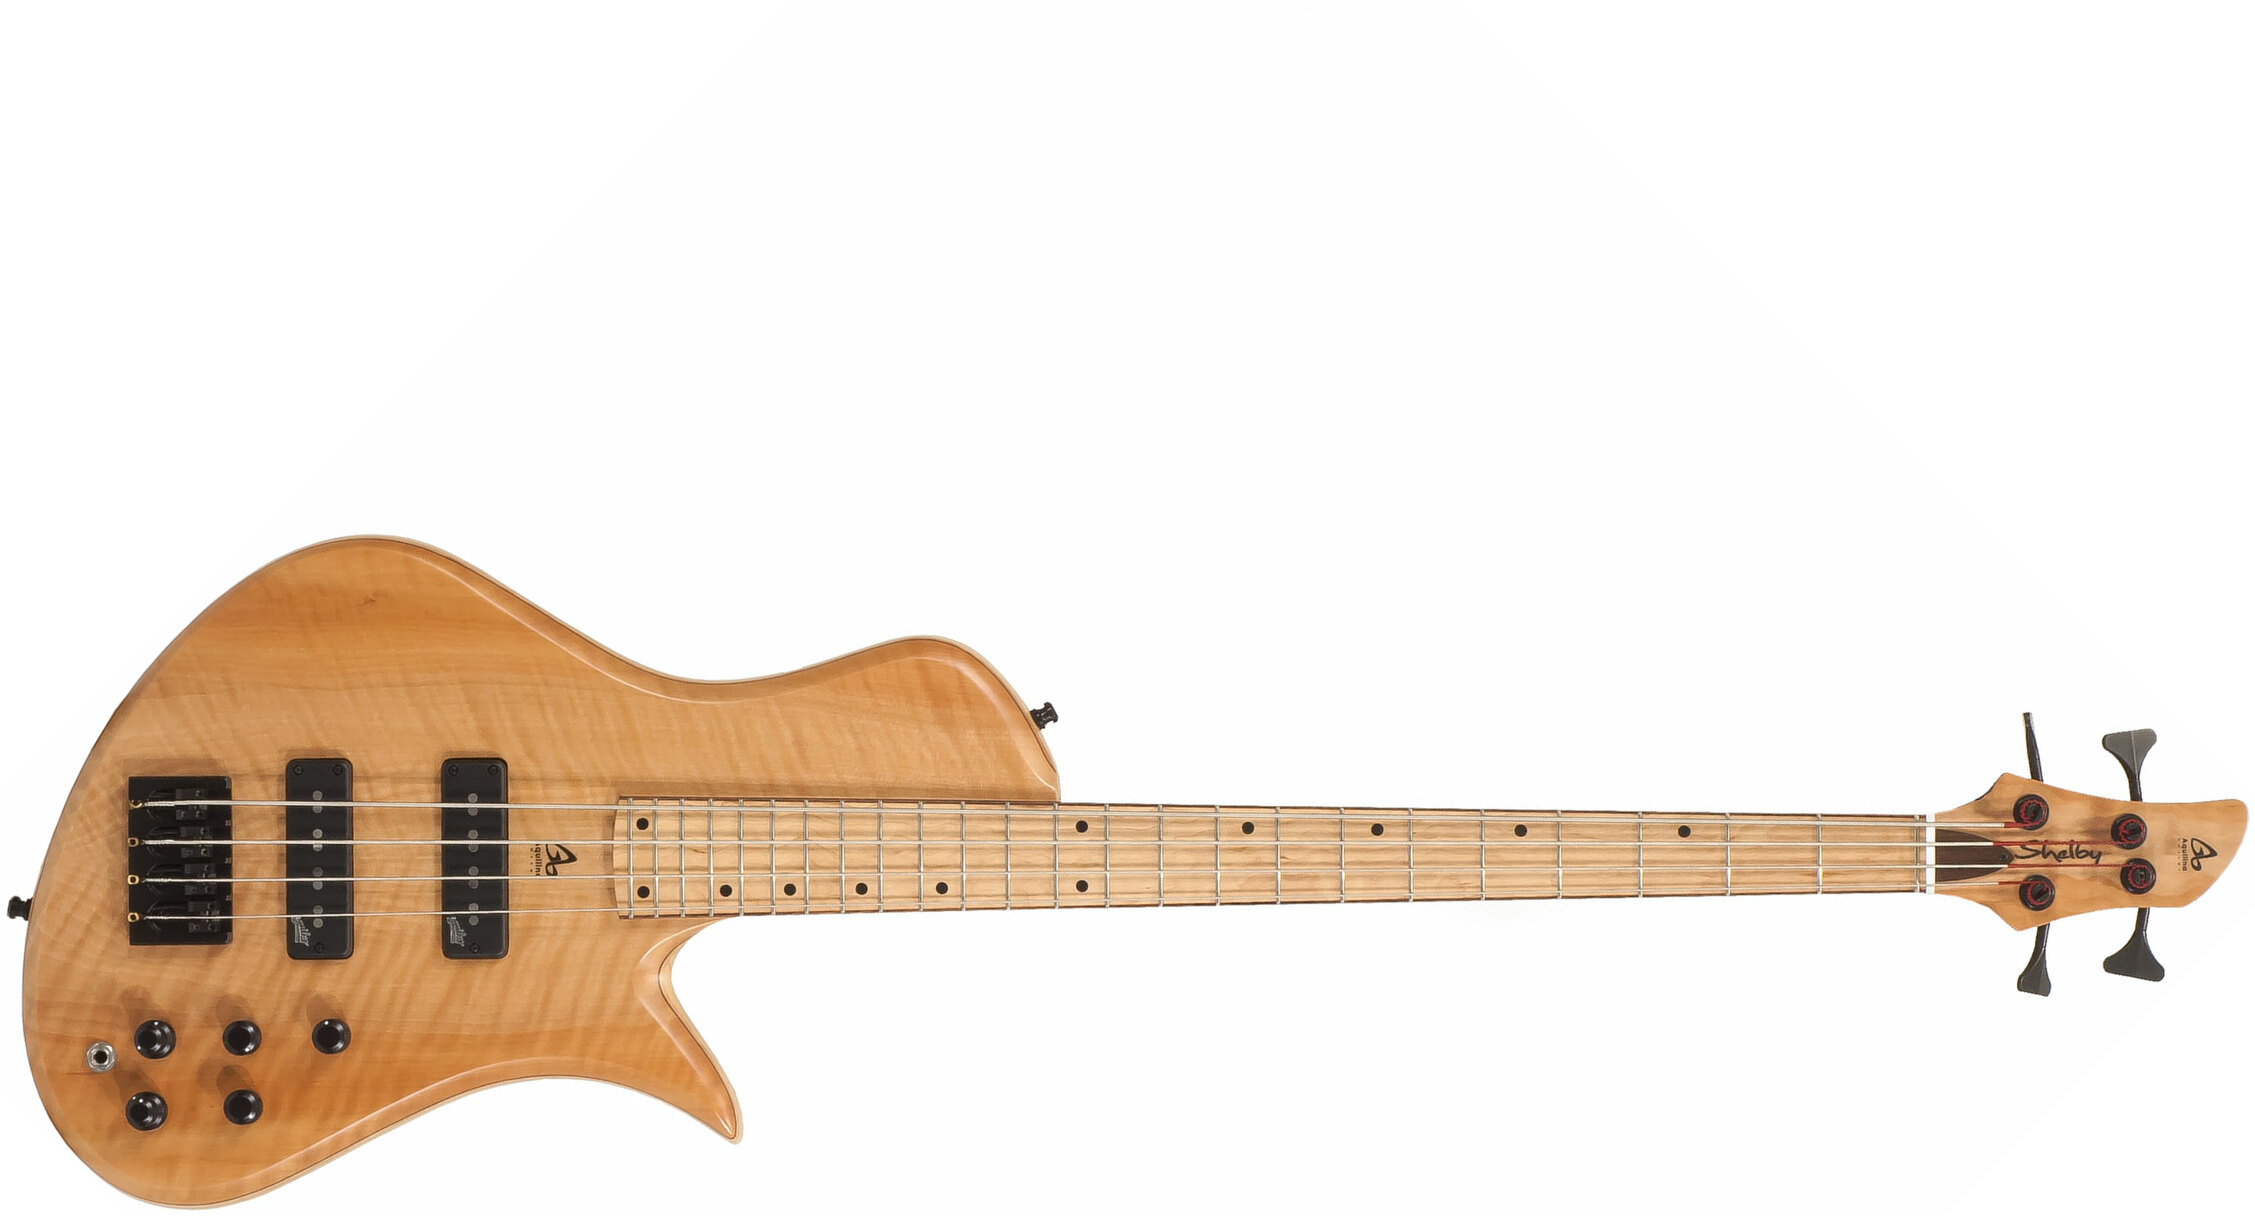 Aquilina Shelby 4 Custom Aulne/frene Active J.east Noi #01854 - Natural - Basse Électrique Solid Body - Main picture